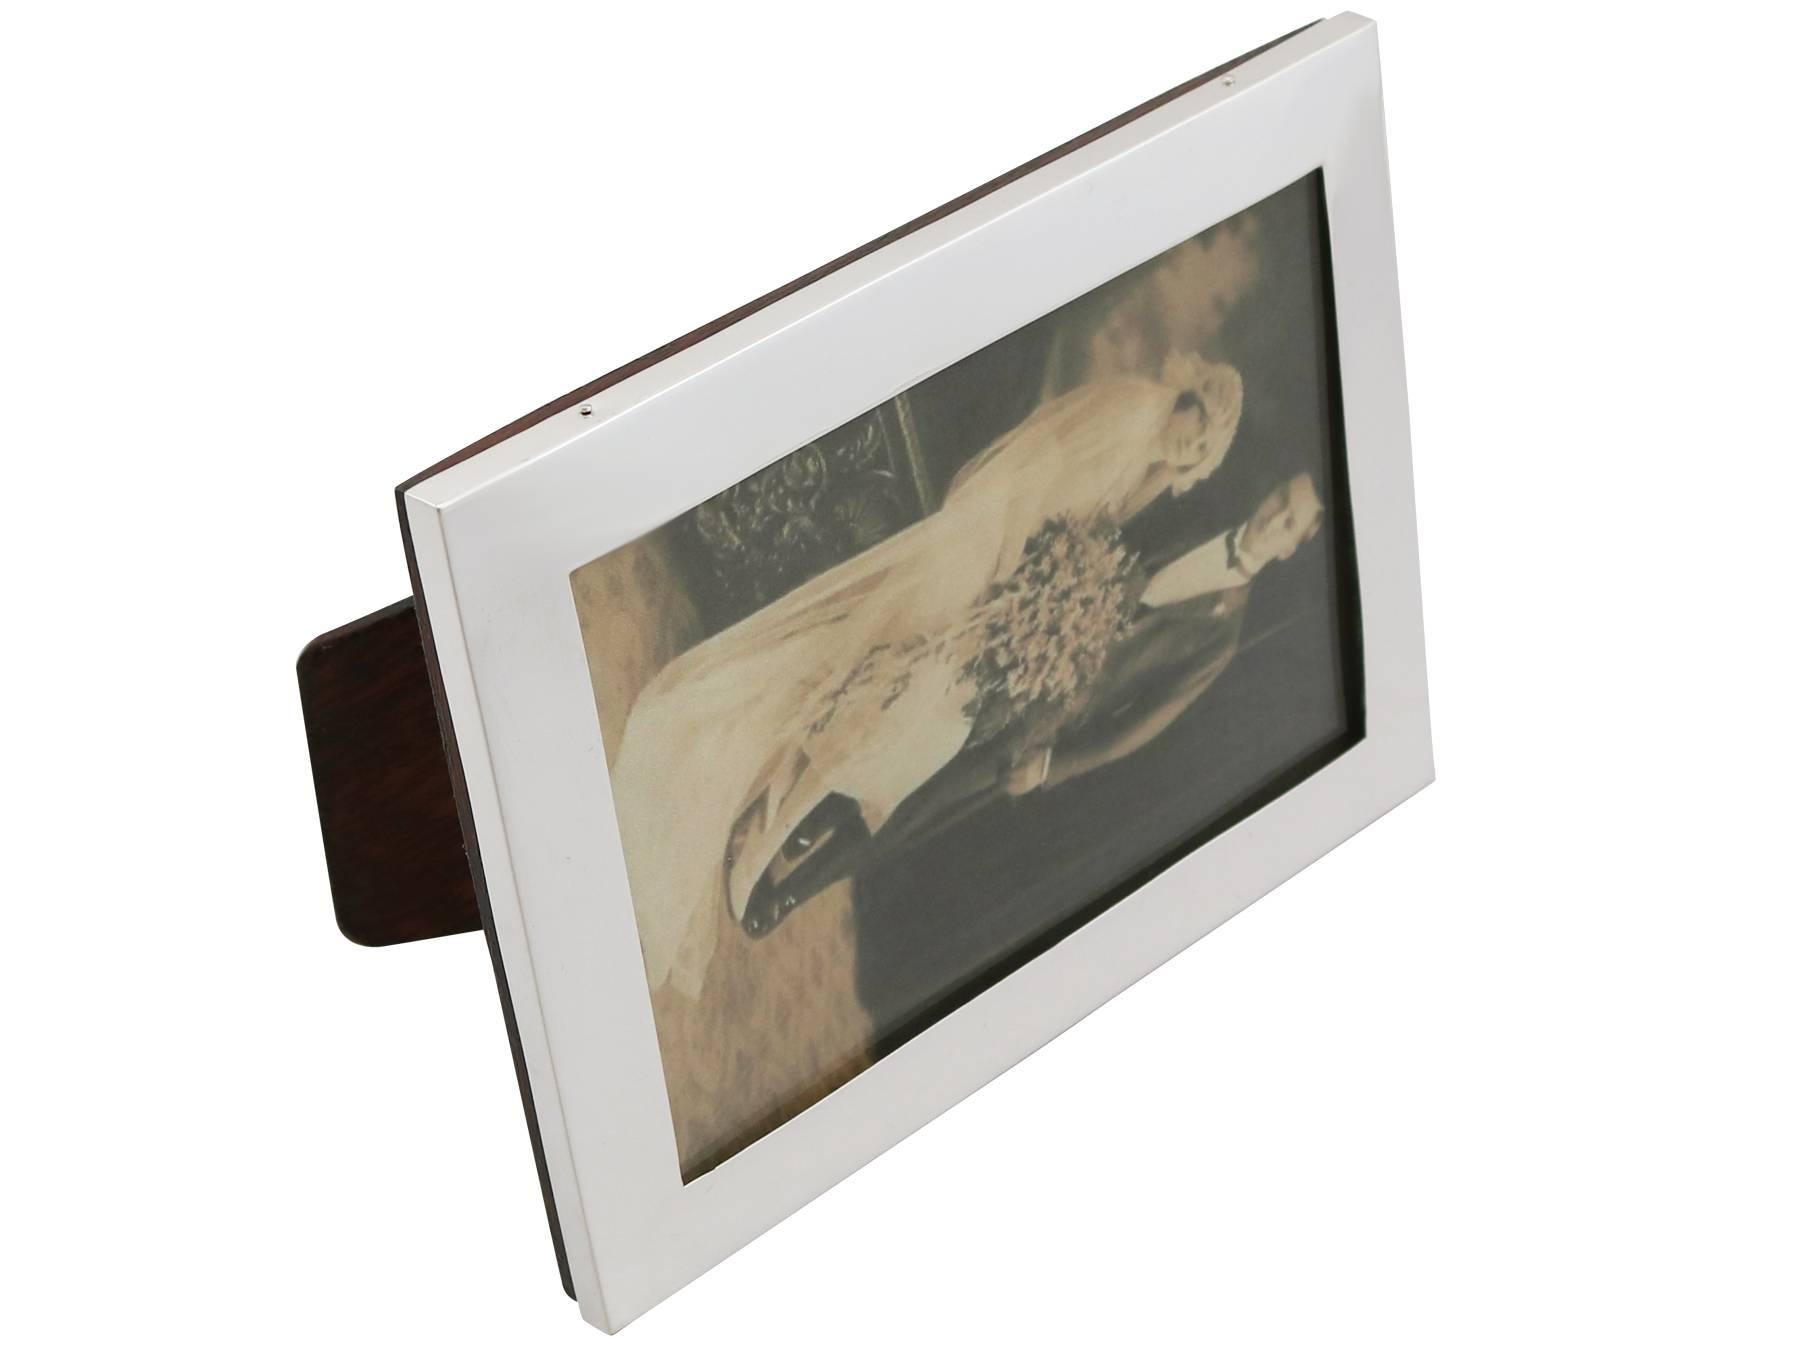 An exceptional, fine and impressive antique George V English sterling silver photograph frame; an addition to our range of Birmingham silver.

This exceptional antique George V sterling silver photo frame has a plain rectangular form.

The